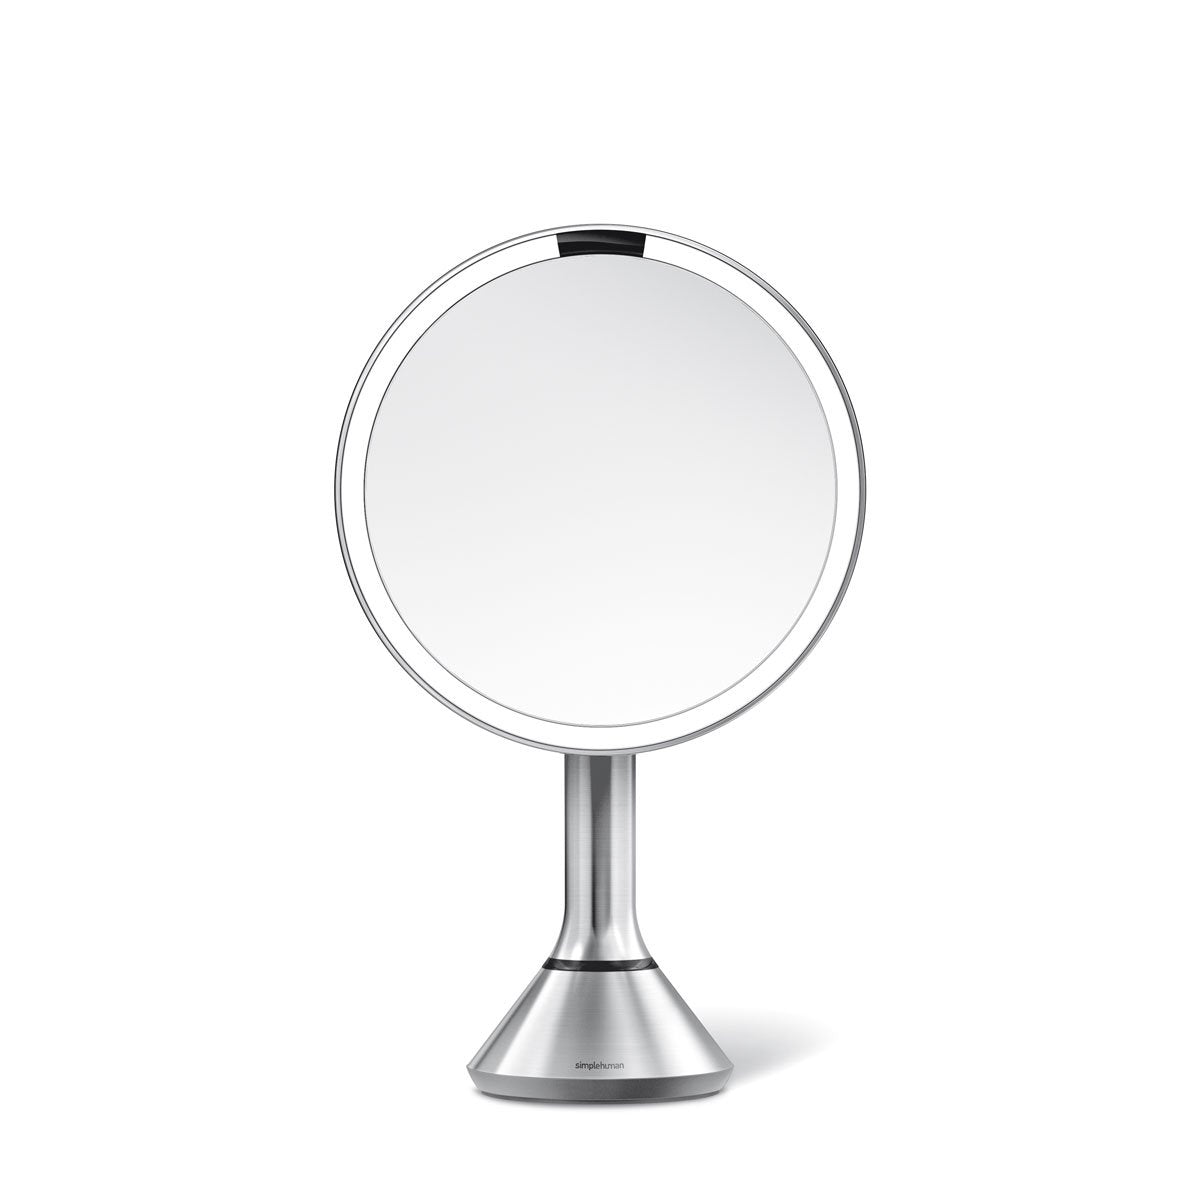 sensor mirror round with touch-control brightness and dual light setting product support